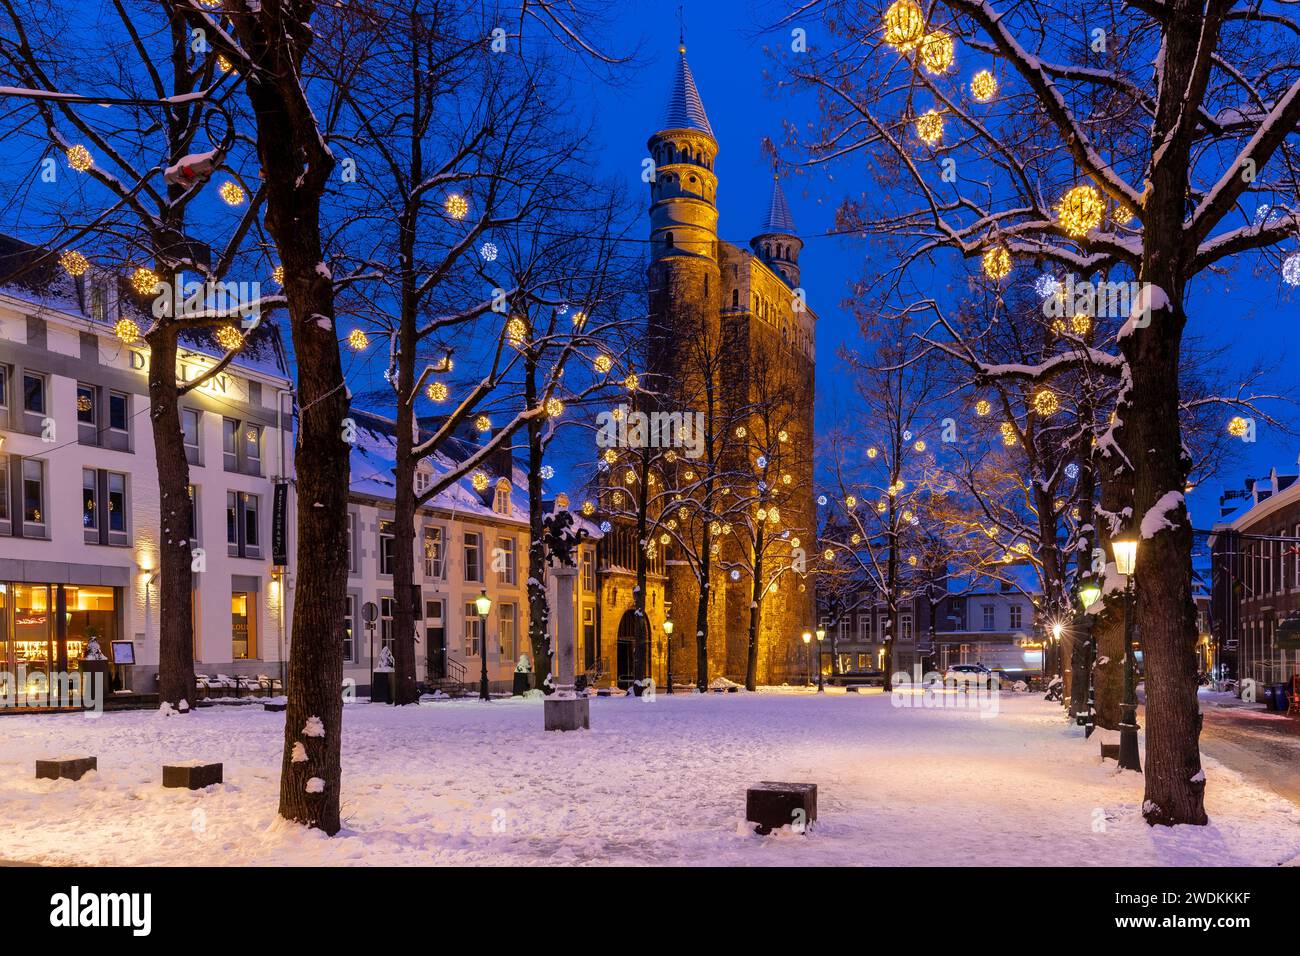 Basilica of Our Lady and the square during twilight, covered with fresh snow during winter time and illuminated with Christmas decoration, creating a Stock Photo